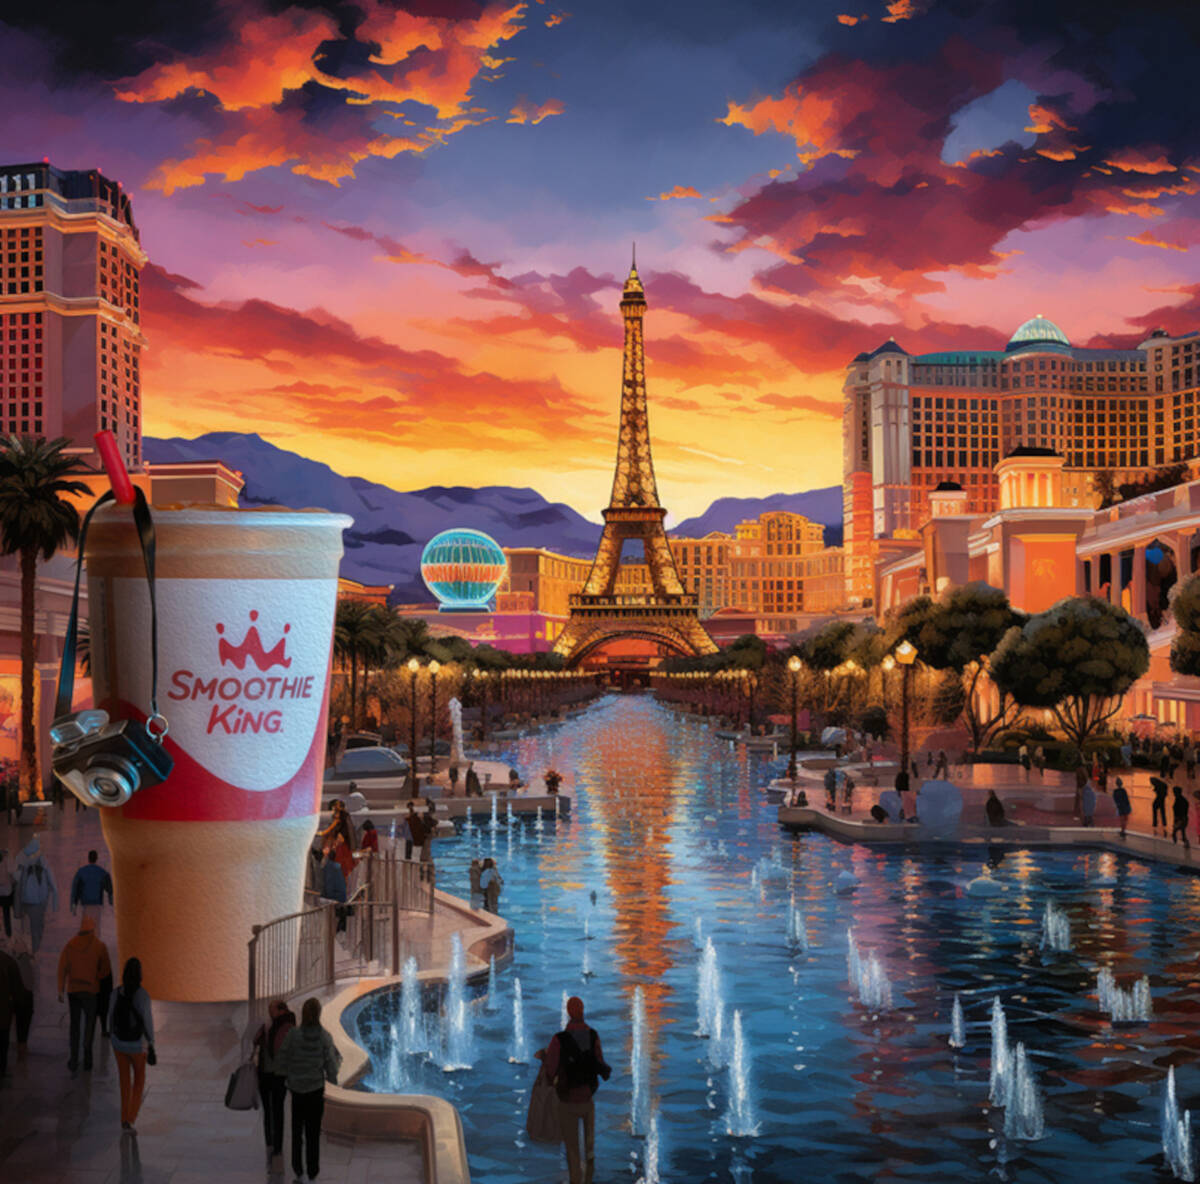 The Smoothie King chain has signed agreements to open seven shops across the Las Vegas Valley. ...